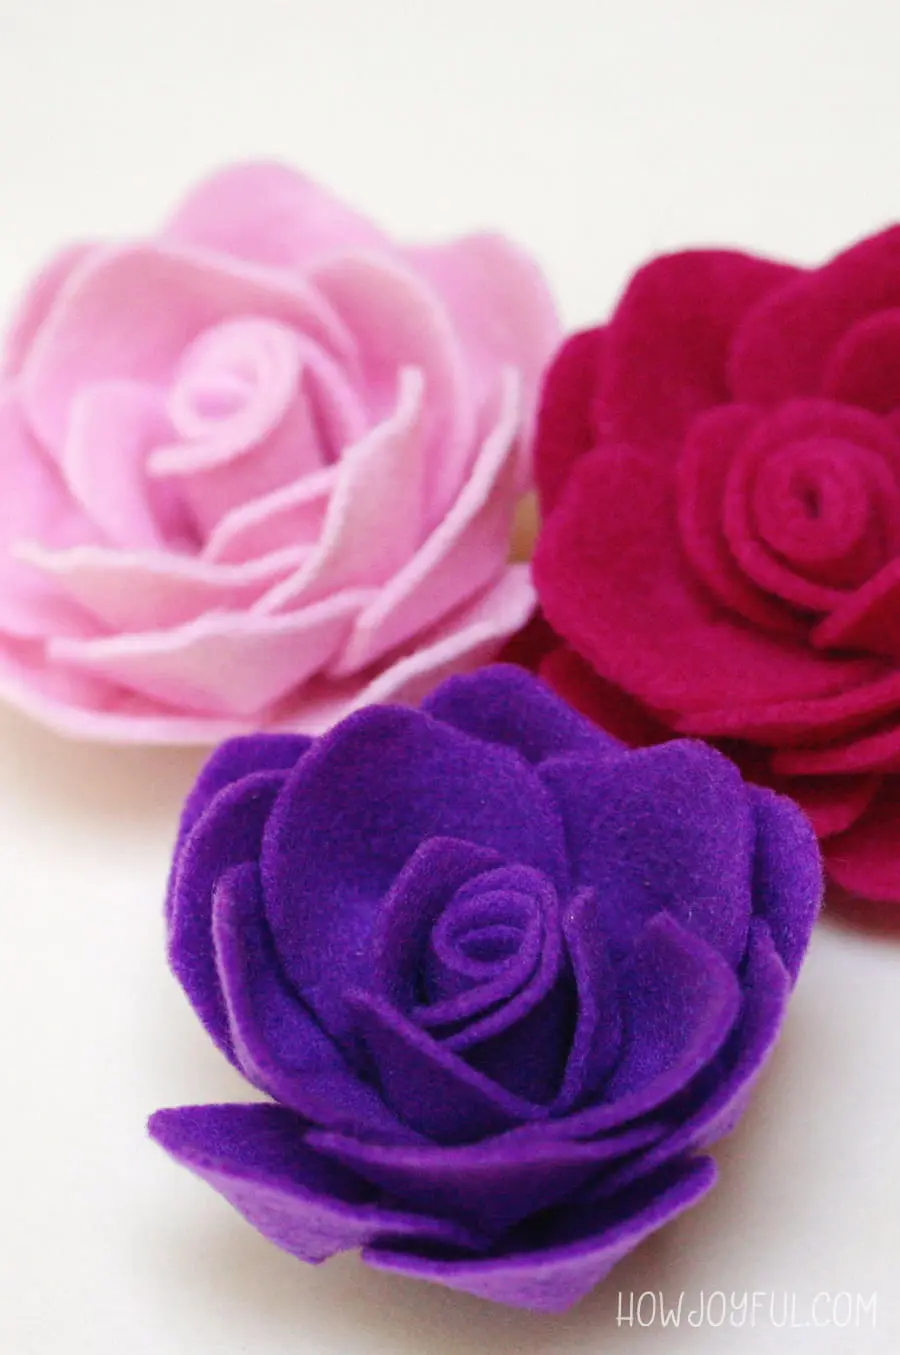 Learn how to make a rose out of felt with @howjoyful's FREE pattern